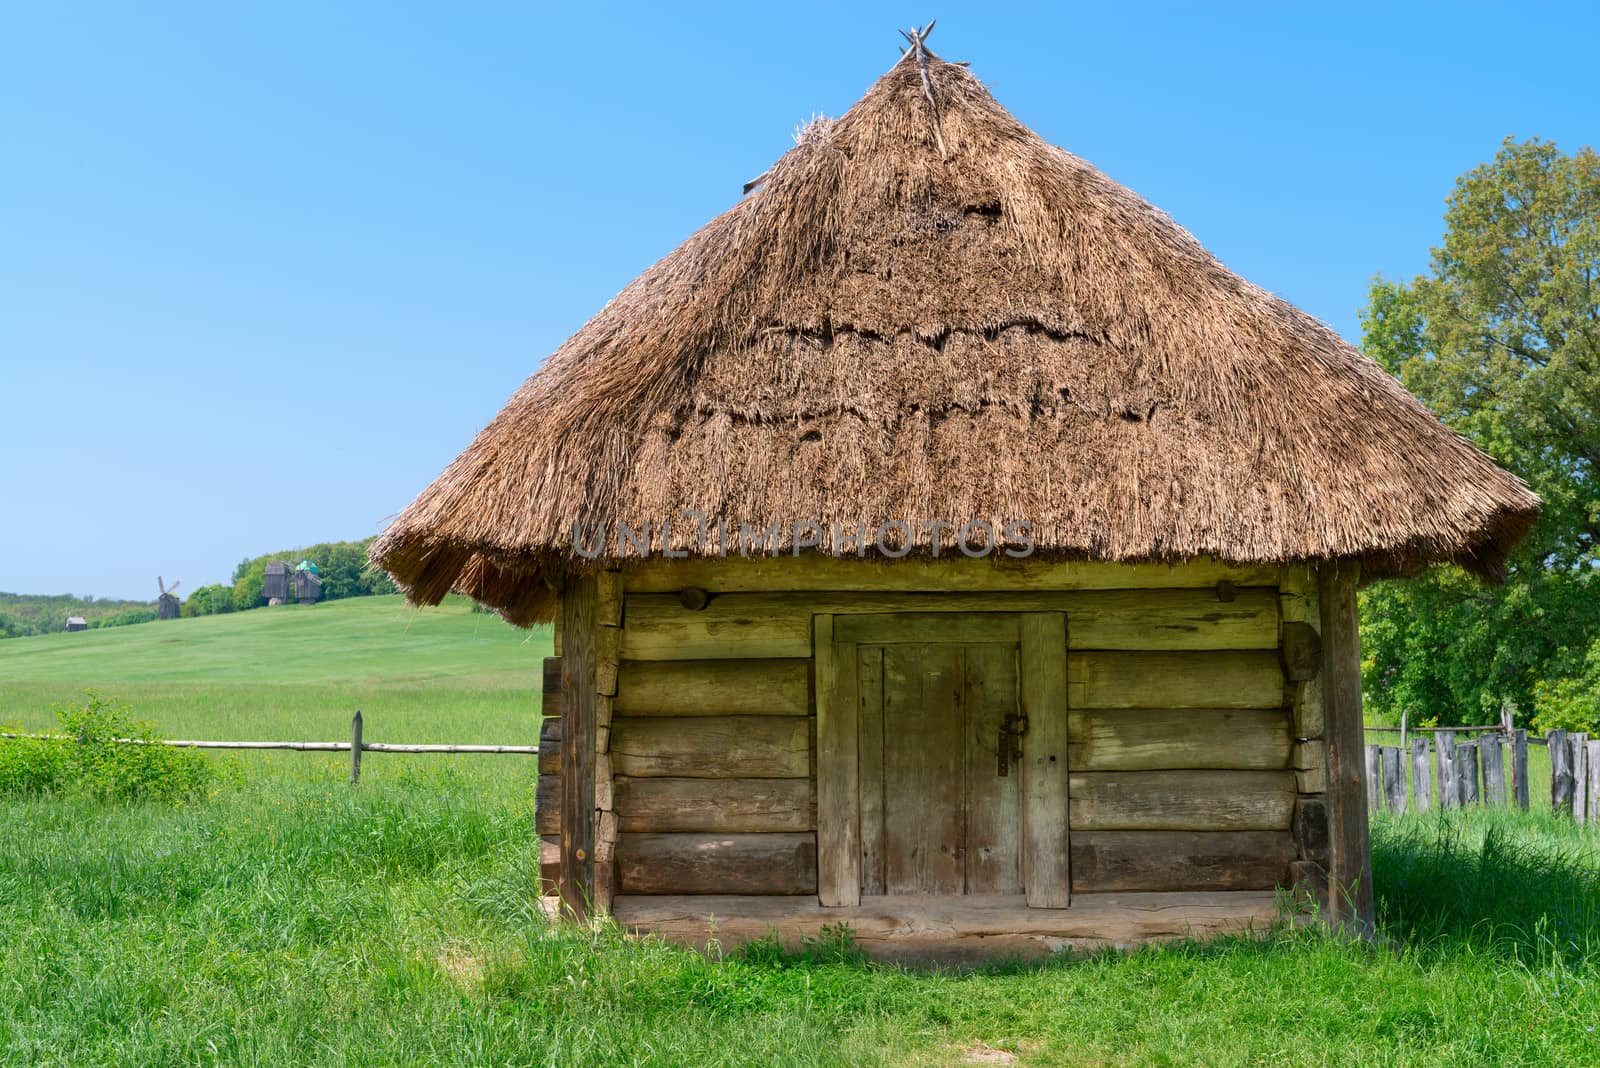 Typical traditional square village antique wooden storehouse or shed with straw roof